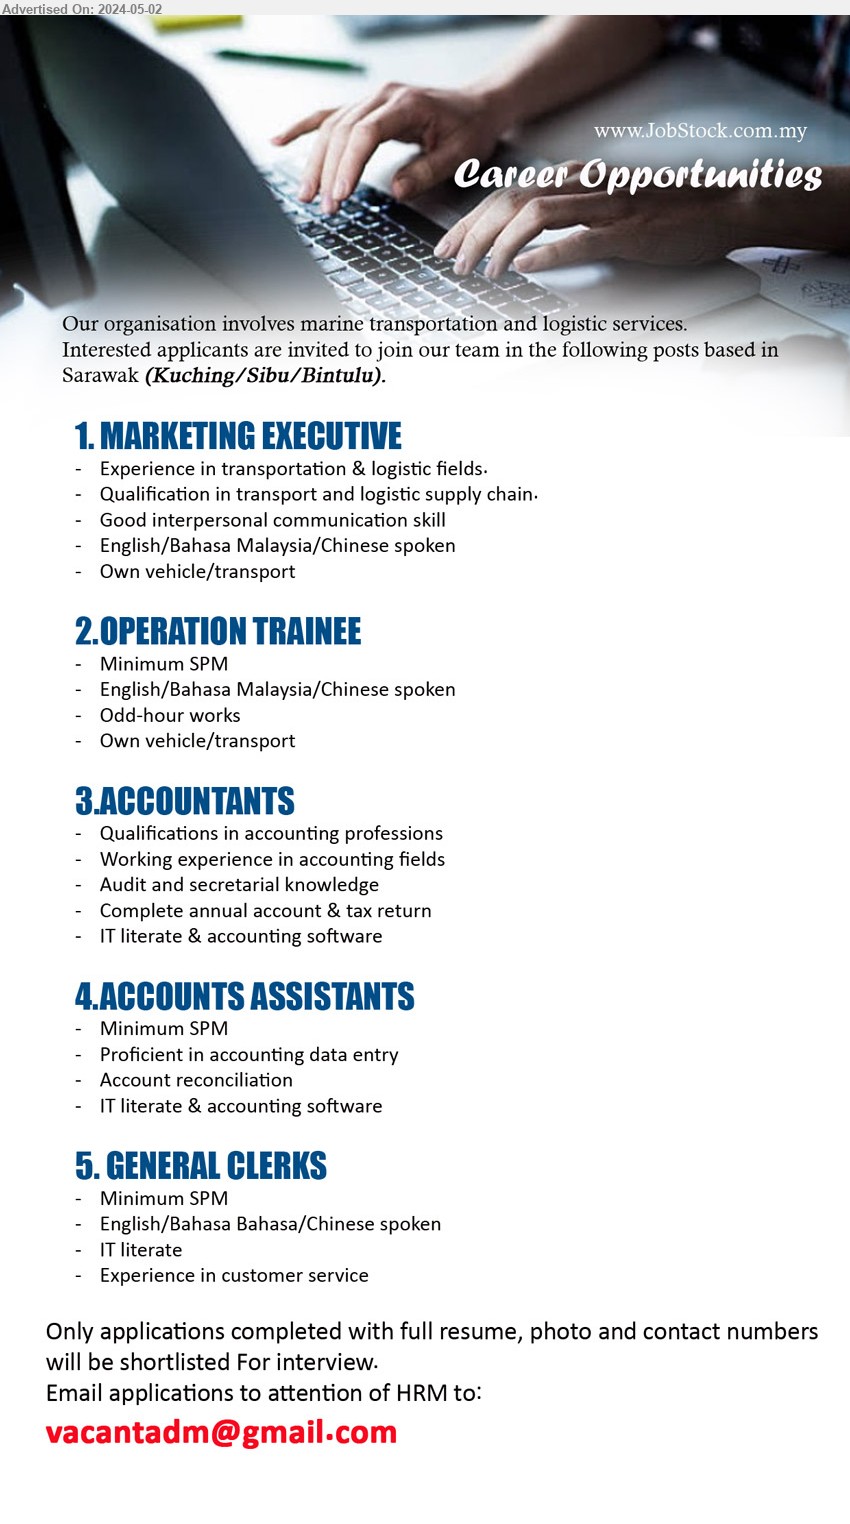 ADVERTISER - 1. MARKETING EXECUTIVE (Kuching, Sibu, Bintulu), Experience in transportation & logistic fields, Qualification in transport and logistic supply chain,...
2. OPERATION TRAINEE (Kuching, Sibu, Bintulu), SPM, English/Bahasa Malaysia/Chinese spoken,...
3. ACCOUNTANTS (Kuching, Sibu, Bintulu), Qualifications in accounting professions, Audit and secretarial knowledge,...
4. ACCOUNTS ASSISTANTS (Kuching, Sibu, Bintulu), SPM, IT literate & accounting software 
,...
5. GENERAL CLERKS (Kuching, Sibu, Bintulu), SPM, Experience in customer service, IT literate,...
Email resume to ...